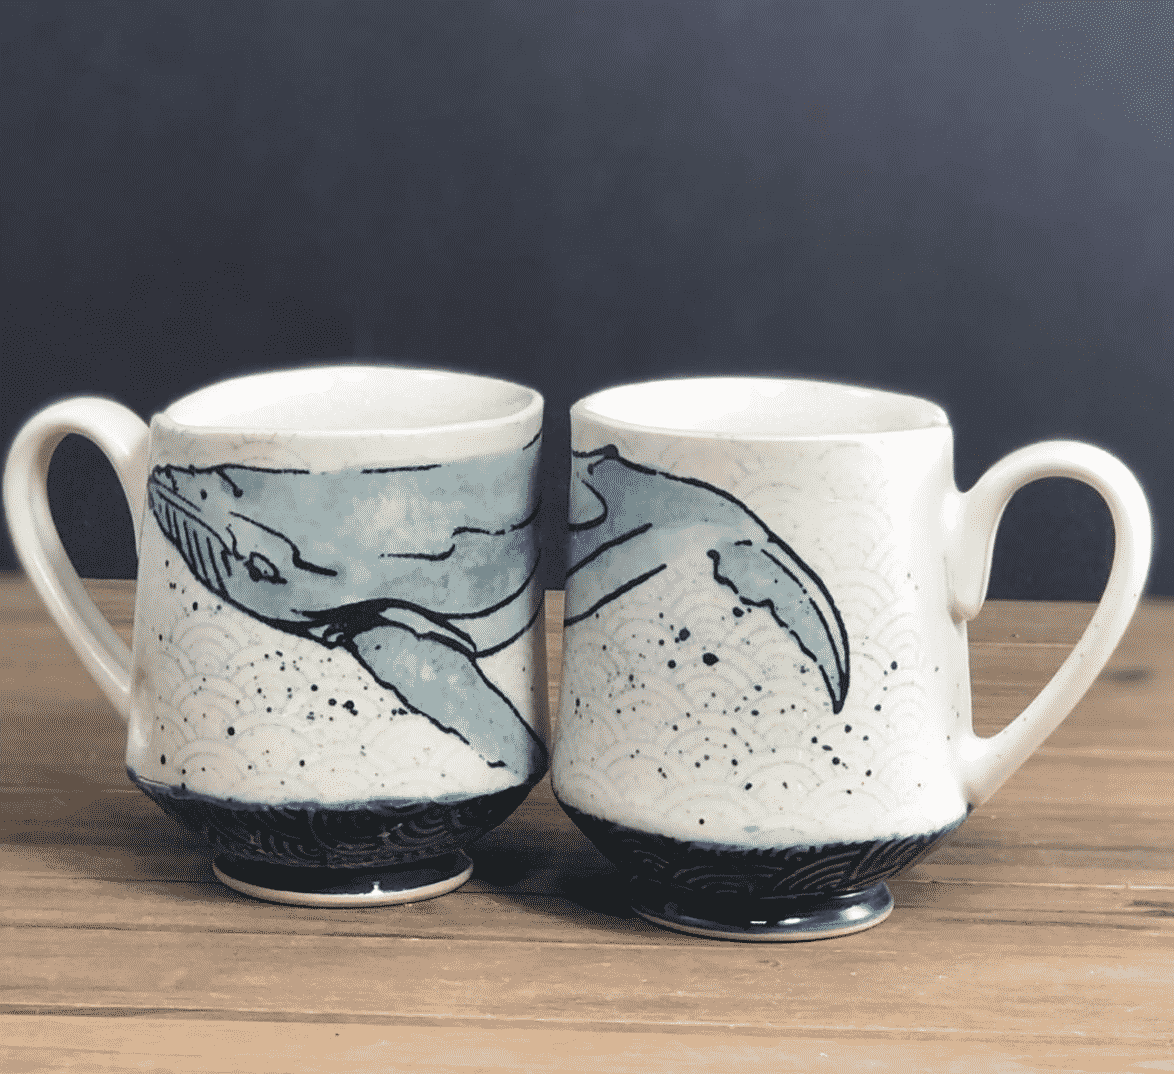 Shawna Pincus: How to transfer images onto your ceramics